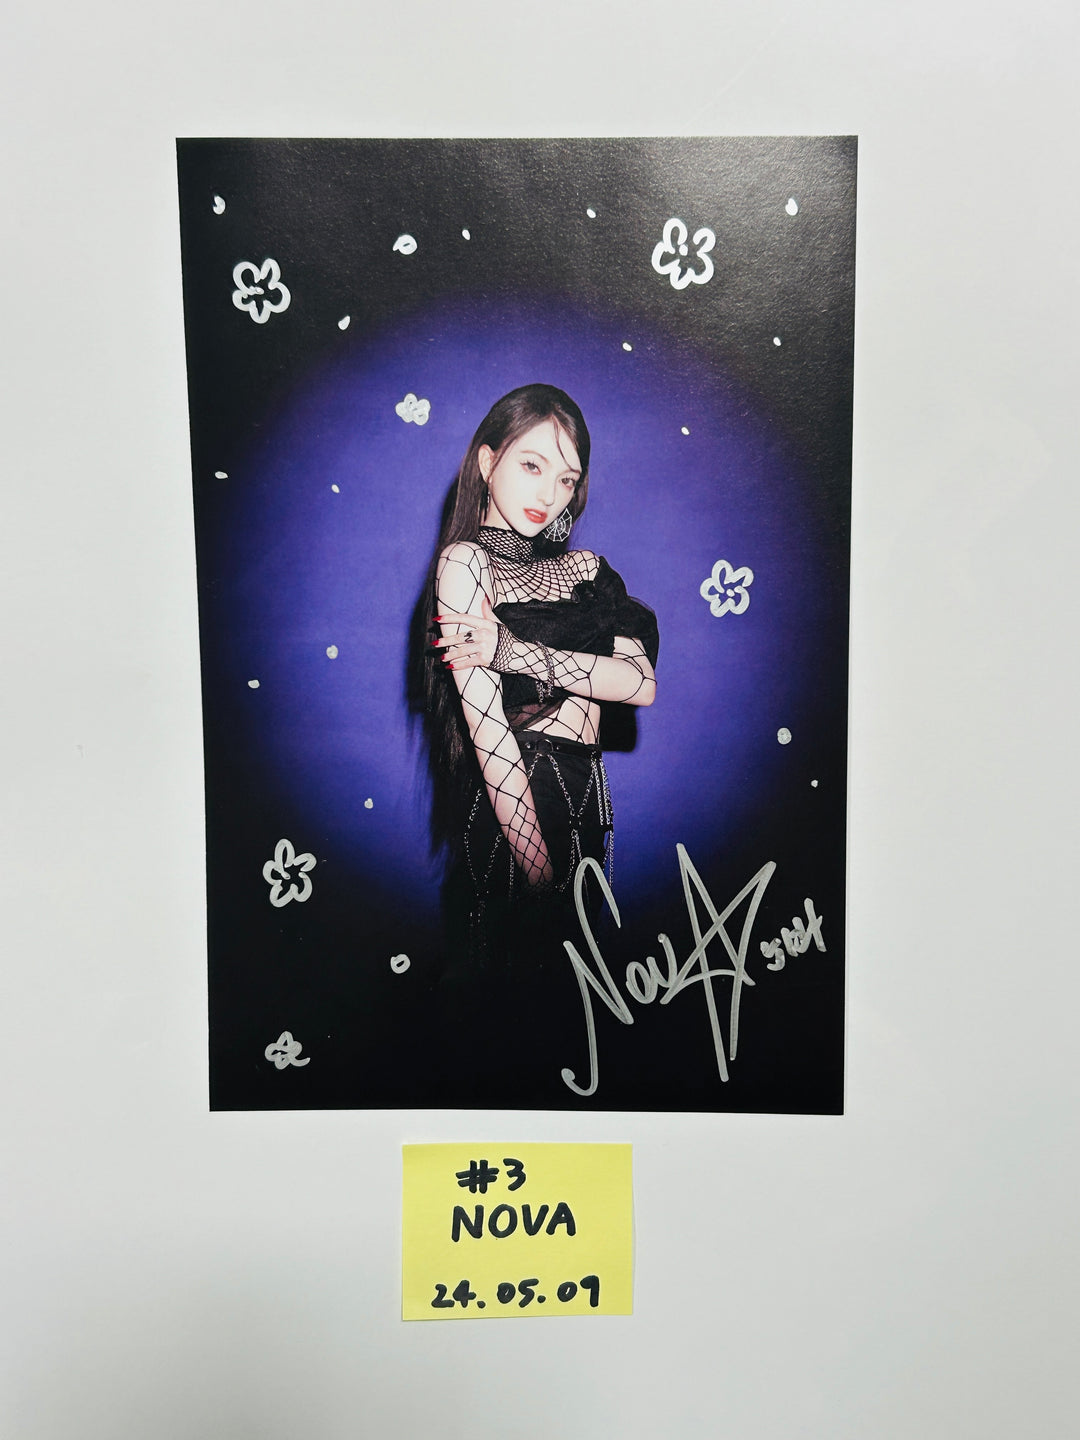 X:IN "THE REAL" - A Cut Page From Fansign Event Album [24.5.9]